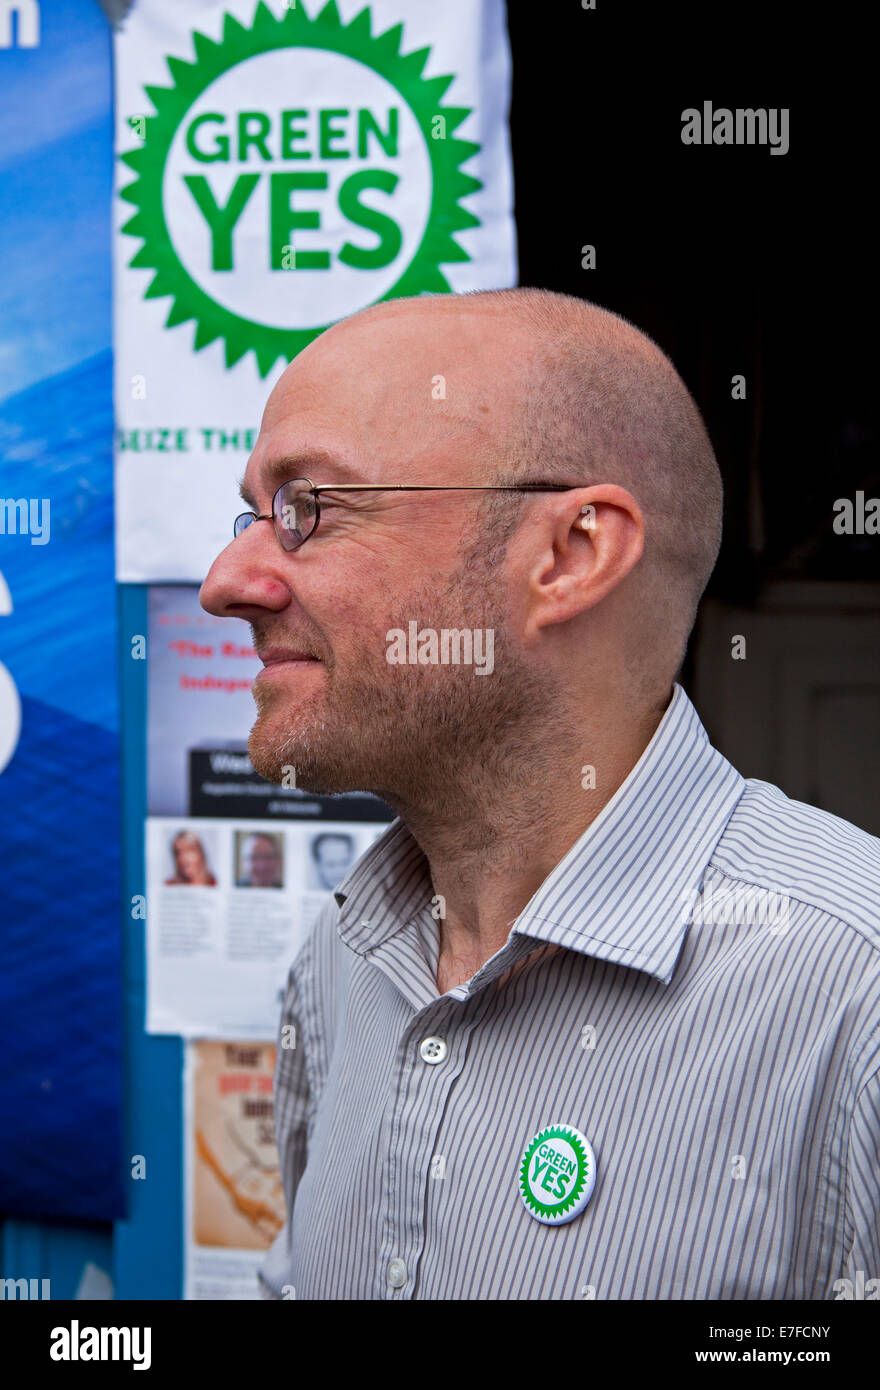 Leith, Edinburgh, Scotland.16th Sept. 2014.Patrick Harvie  Green MSP for Glasgow and Co-convener of the Scottish Green Party, photocall for the Scottish Independence Referendum Yes campaign. Stock Photo